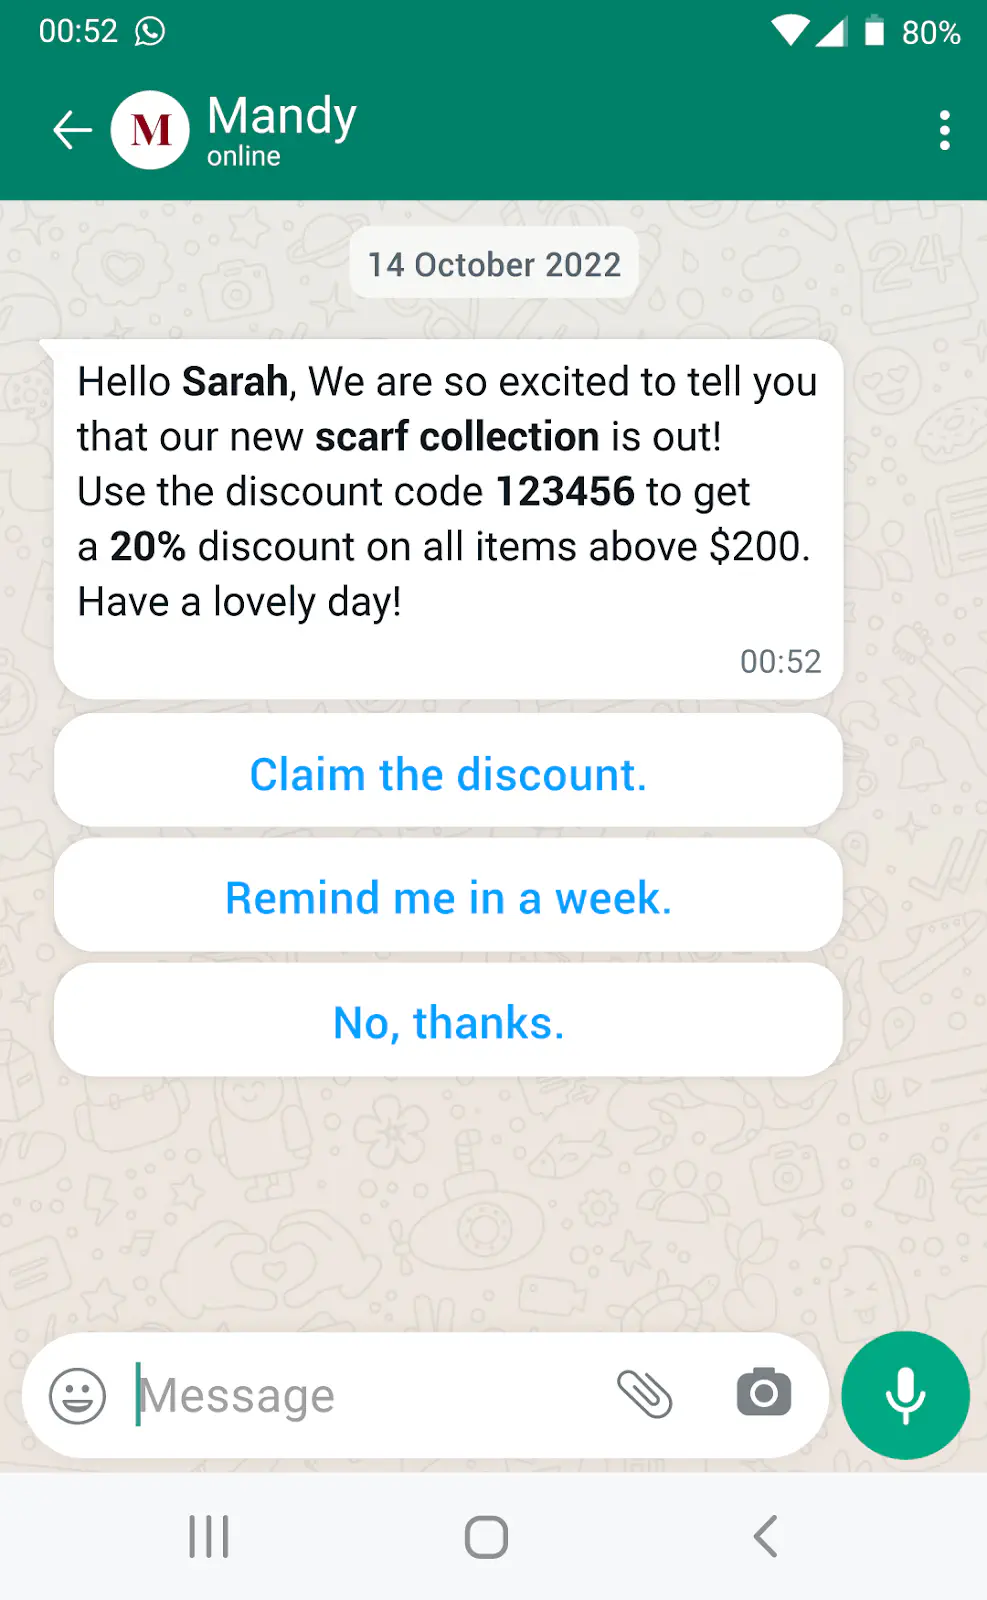 Interactive WhatsApp message with a discount code